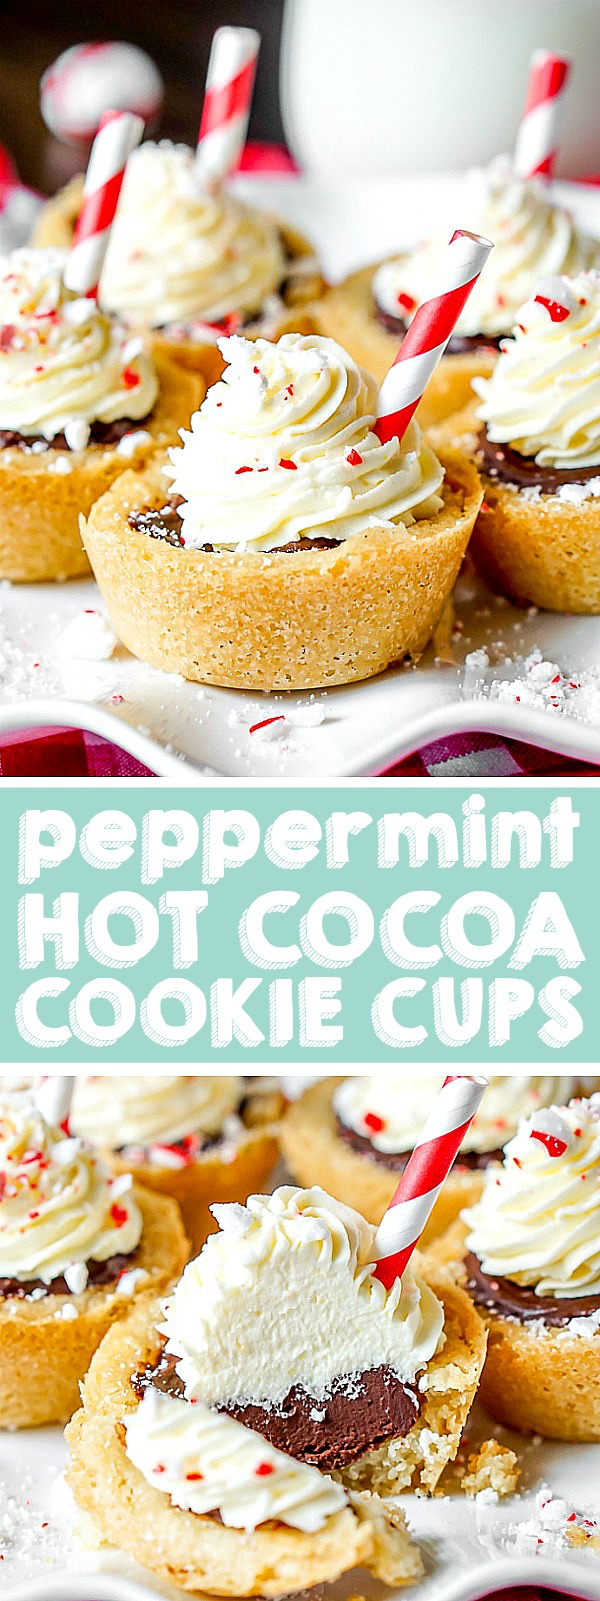 Bring the classic holiday drink to your Christmas cookies with these Hot Chocolate Cookie Cups with whipped peppermint topping! An easy sugar cookie cup is filled with rich, decadent chocolate ganache, then garnished with non wilting whipped topping, peppermint pieces and a straw for a gorgeous presentation. They make the perfect addition to any Christmas Cookie Exchange! | THE LOVE NERDS #christmascookie #christmasdessert #holidaycookie #hotchocolaterecipe 